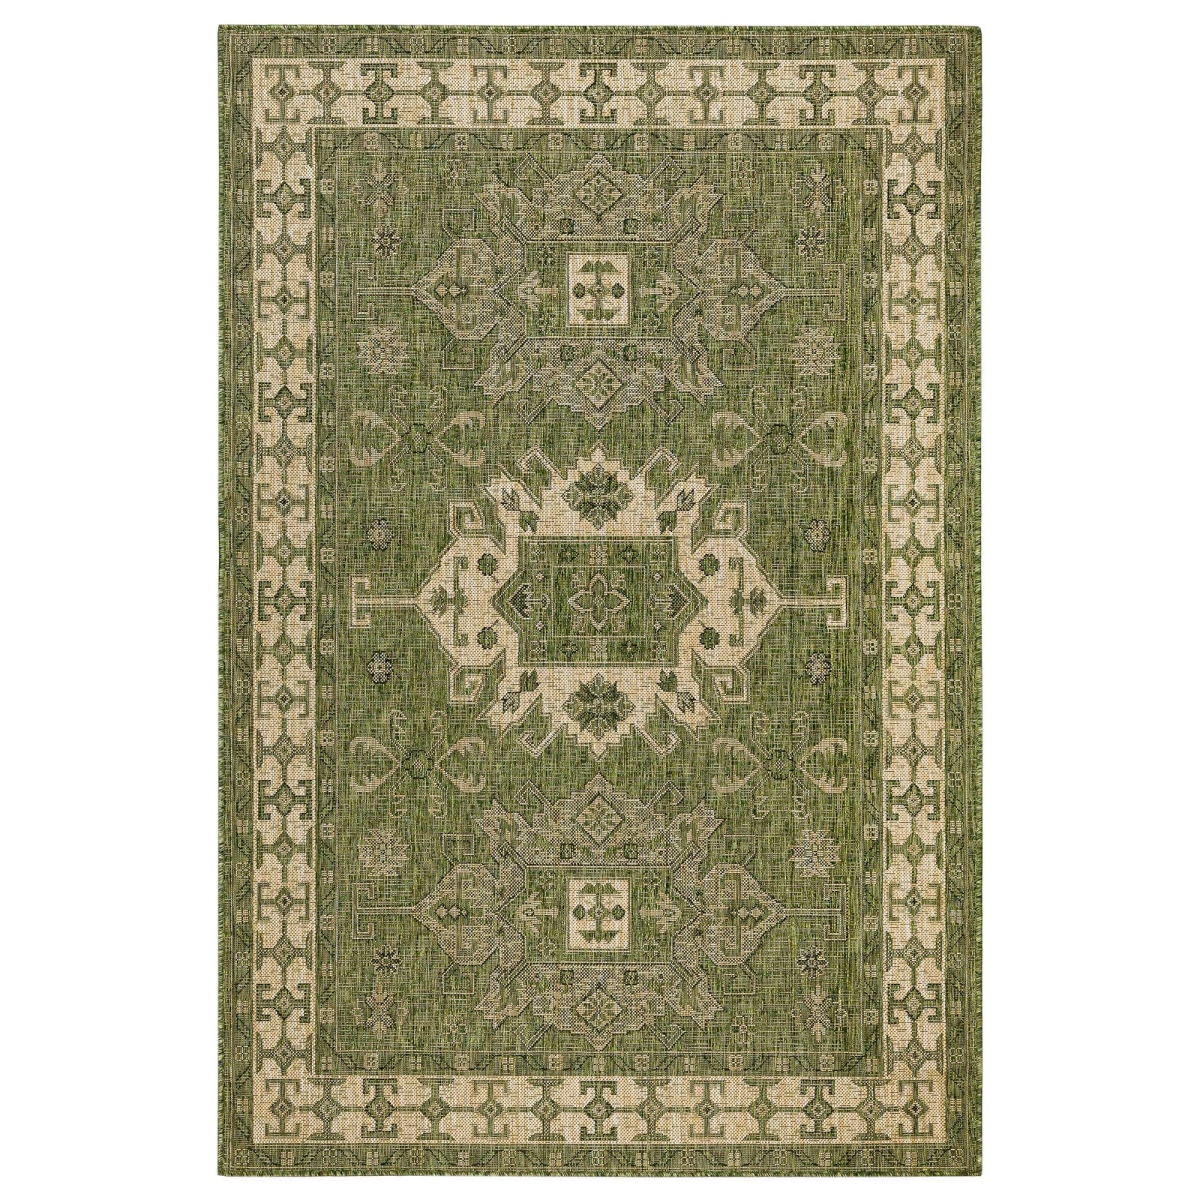 Trans-ocean Imports Cre69840906 6 Ft. 6 In. X 9 Ft. 4 In. Liora Manne Carmel Kilim Indoor & Outdoor Rug Wilton Woven Rectangular Rug - Green